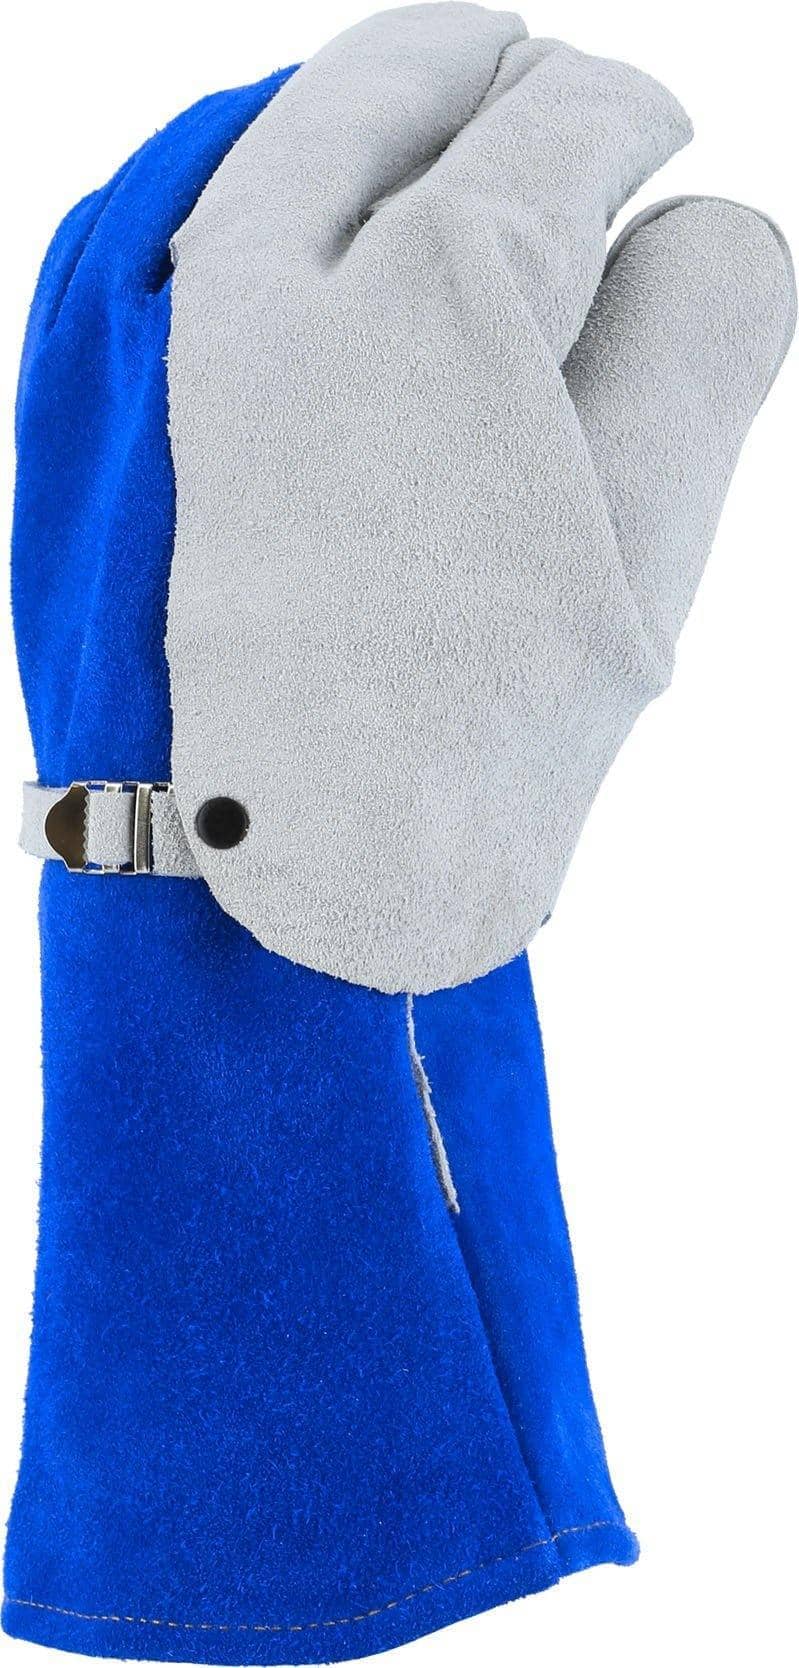 MAJESTIC - Left Hand Leather Glove Cover - Becker Safety and Supply